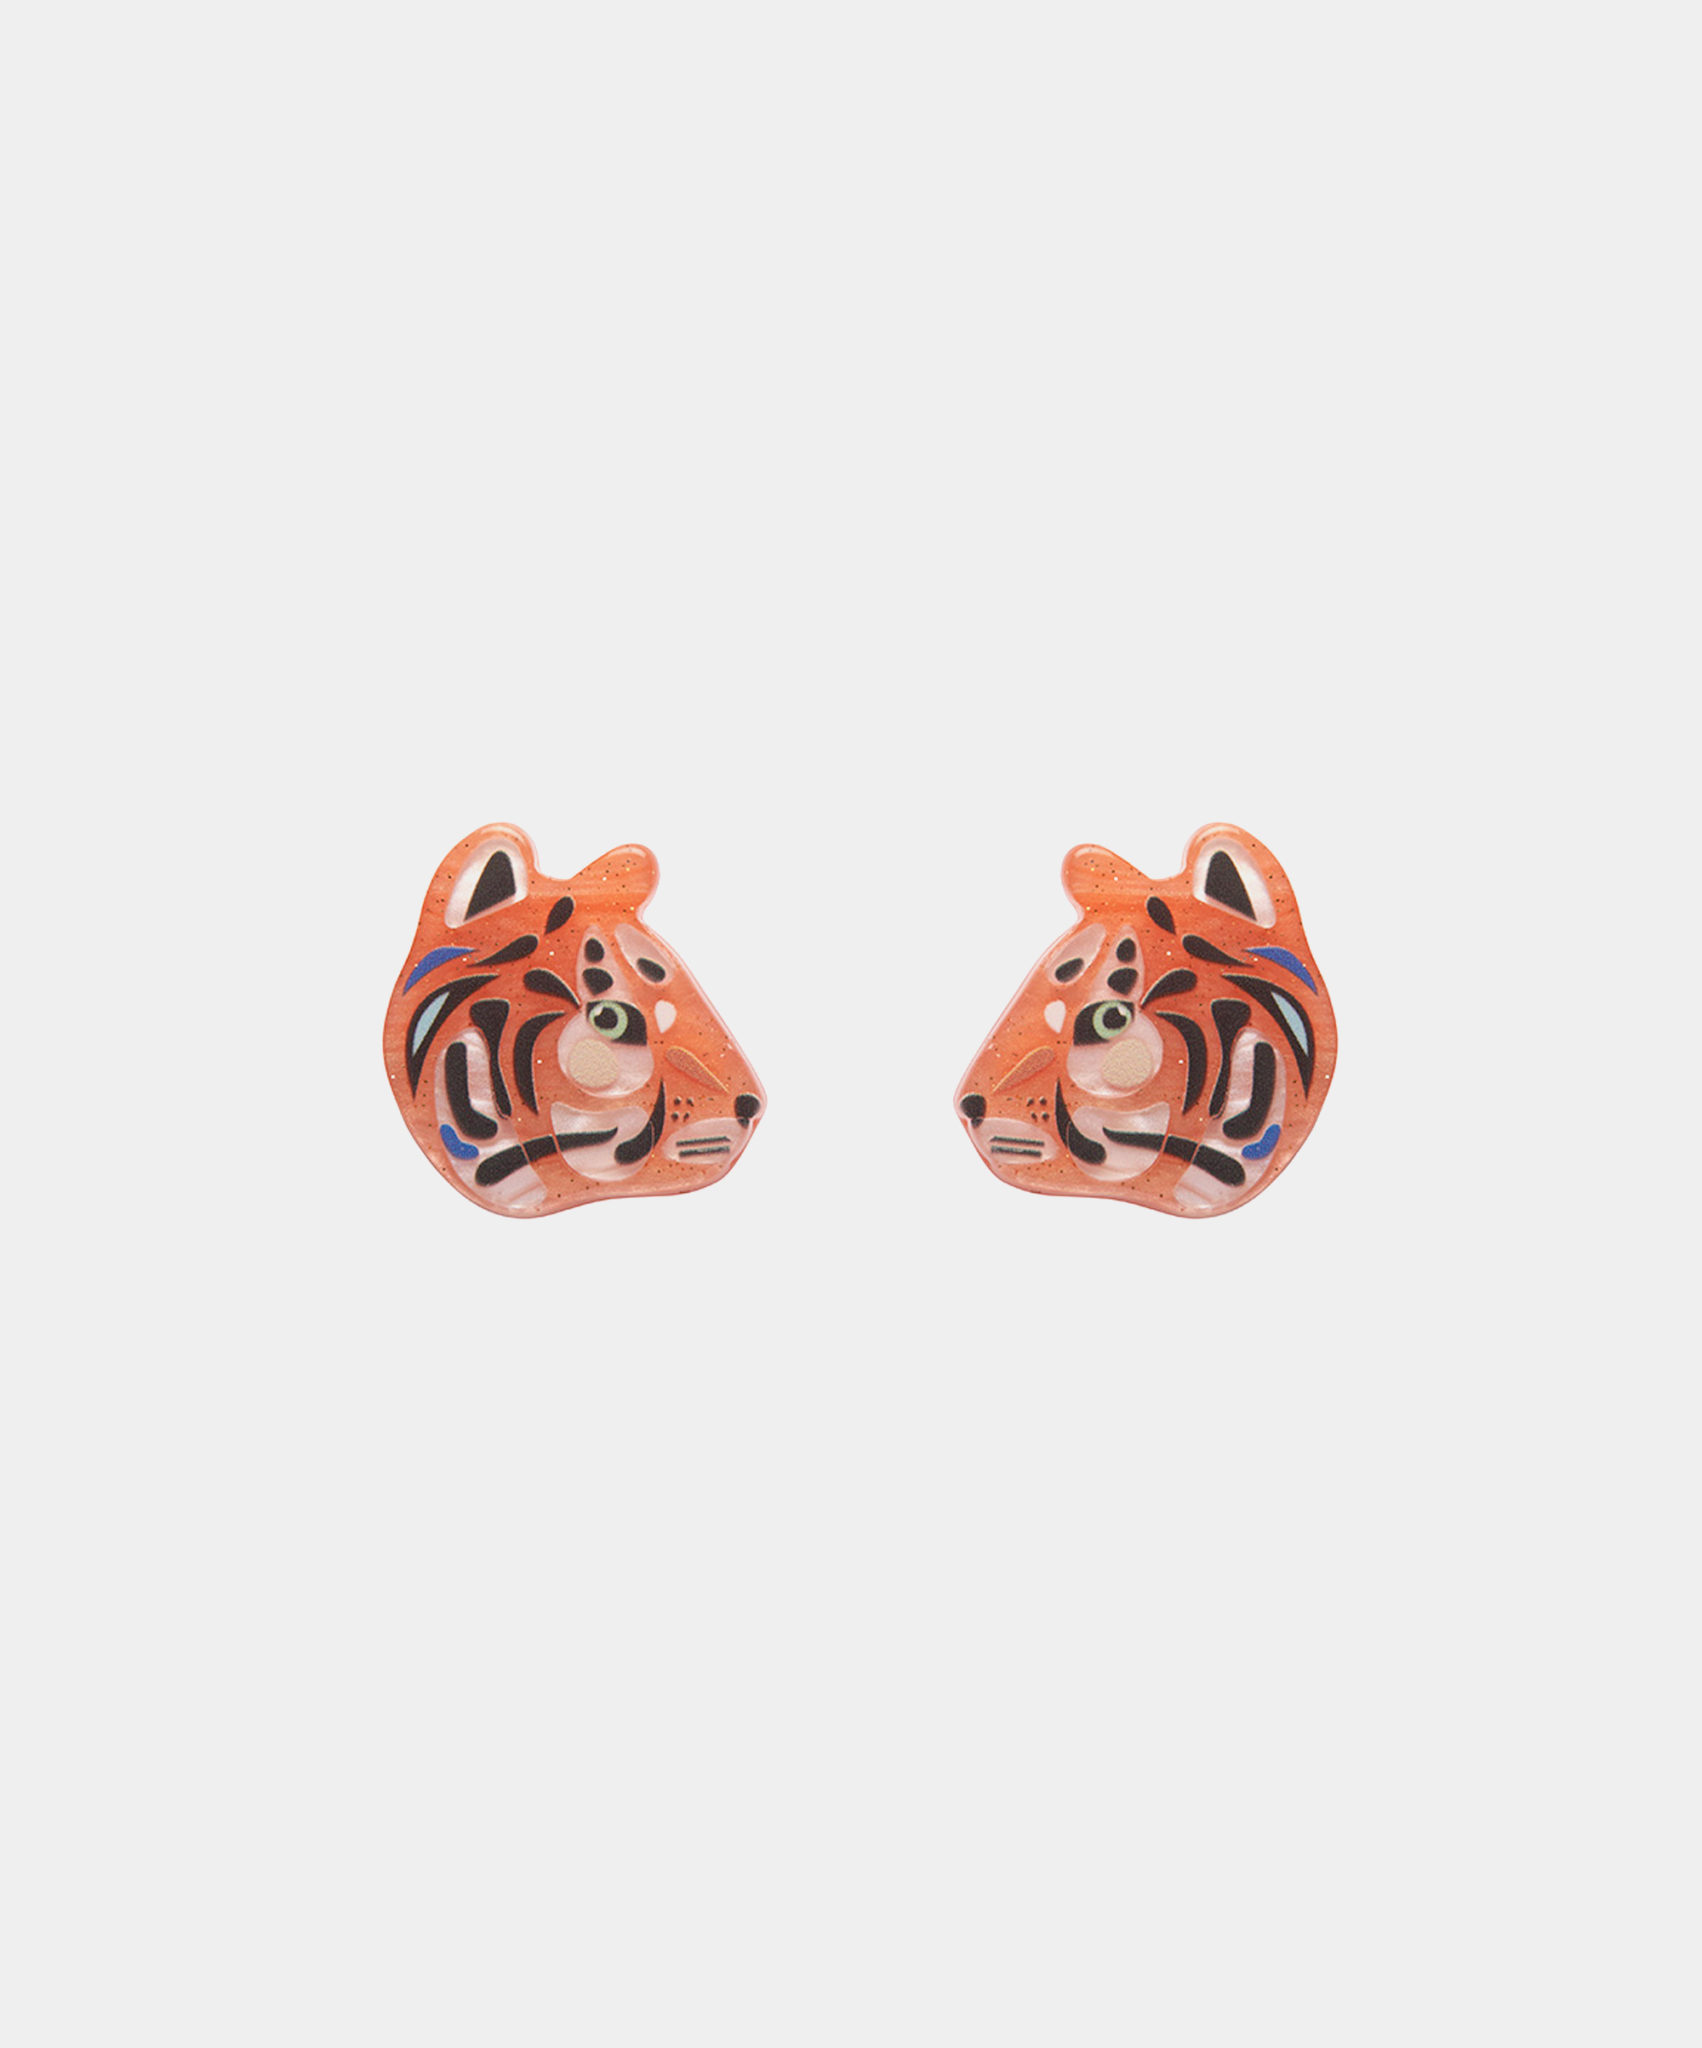 The Tranquil Tiger Earrings - Pete Cromer